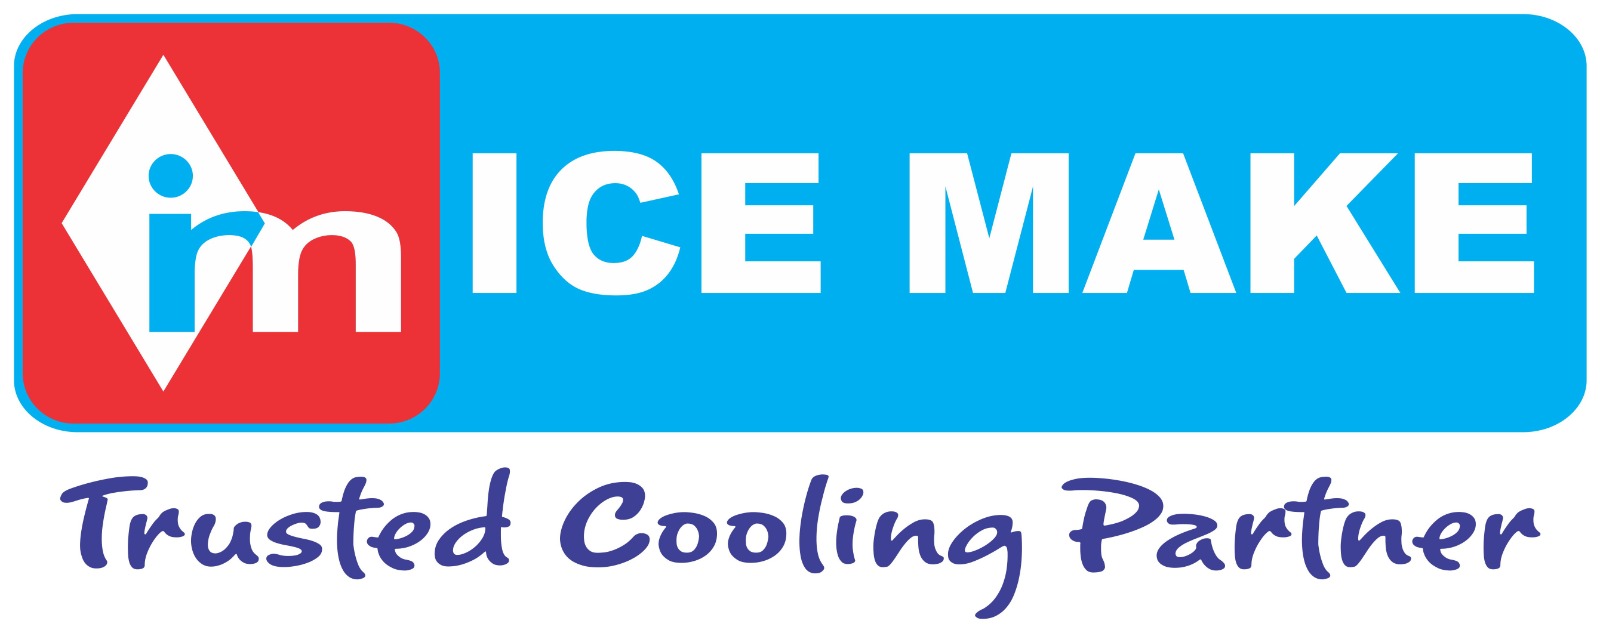 our partners-acc qatar-icemake